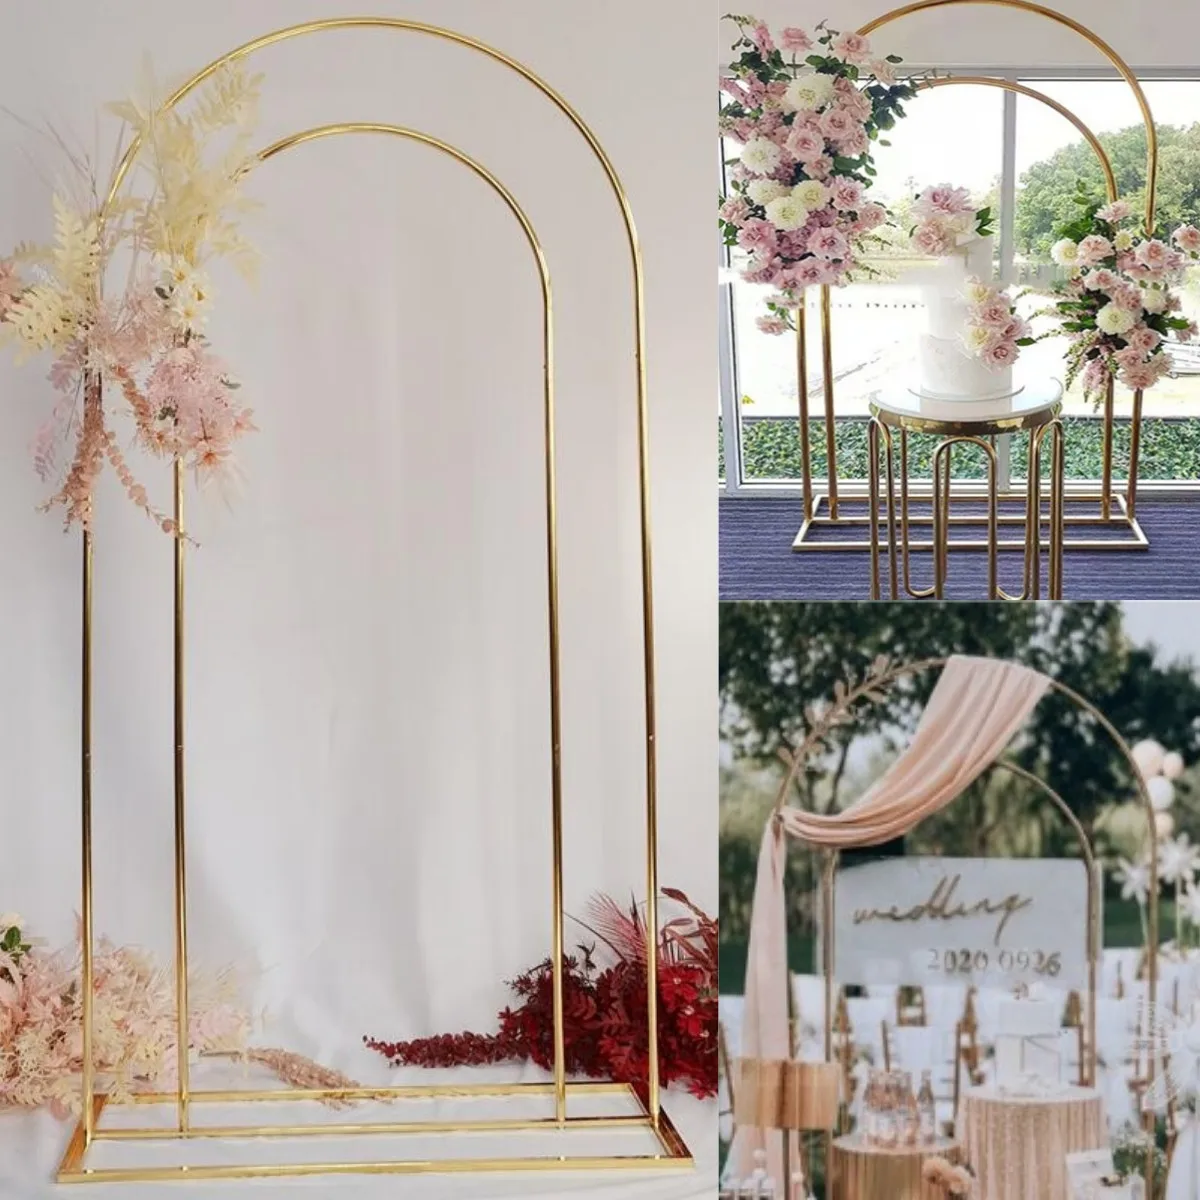 

Outdoor Wedding Iron Double Arch Flower Fabric Sash Display Rack Door Frame Birthday Party Backdrops Welcome Sign Balloons Stand